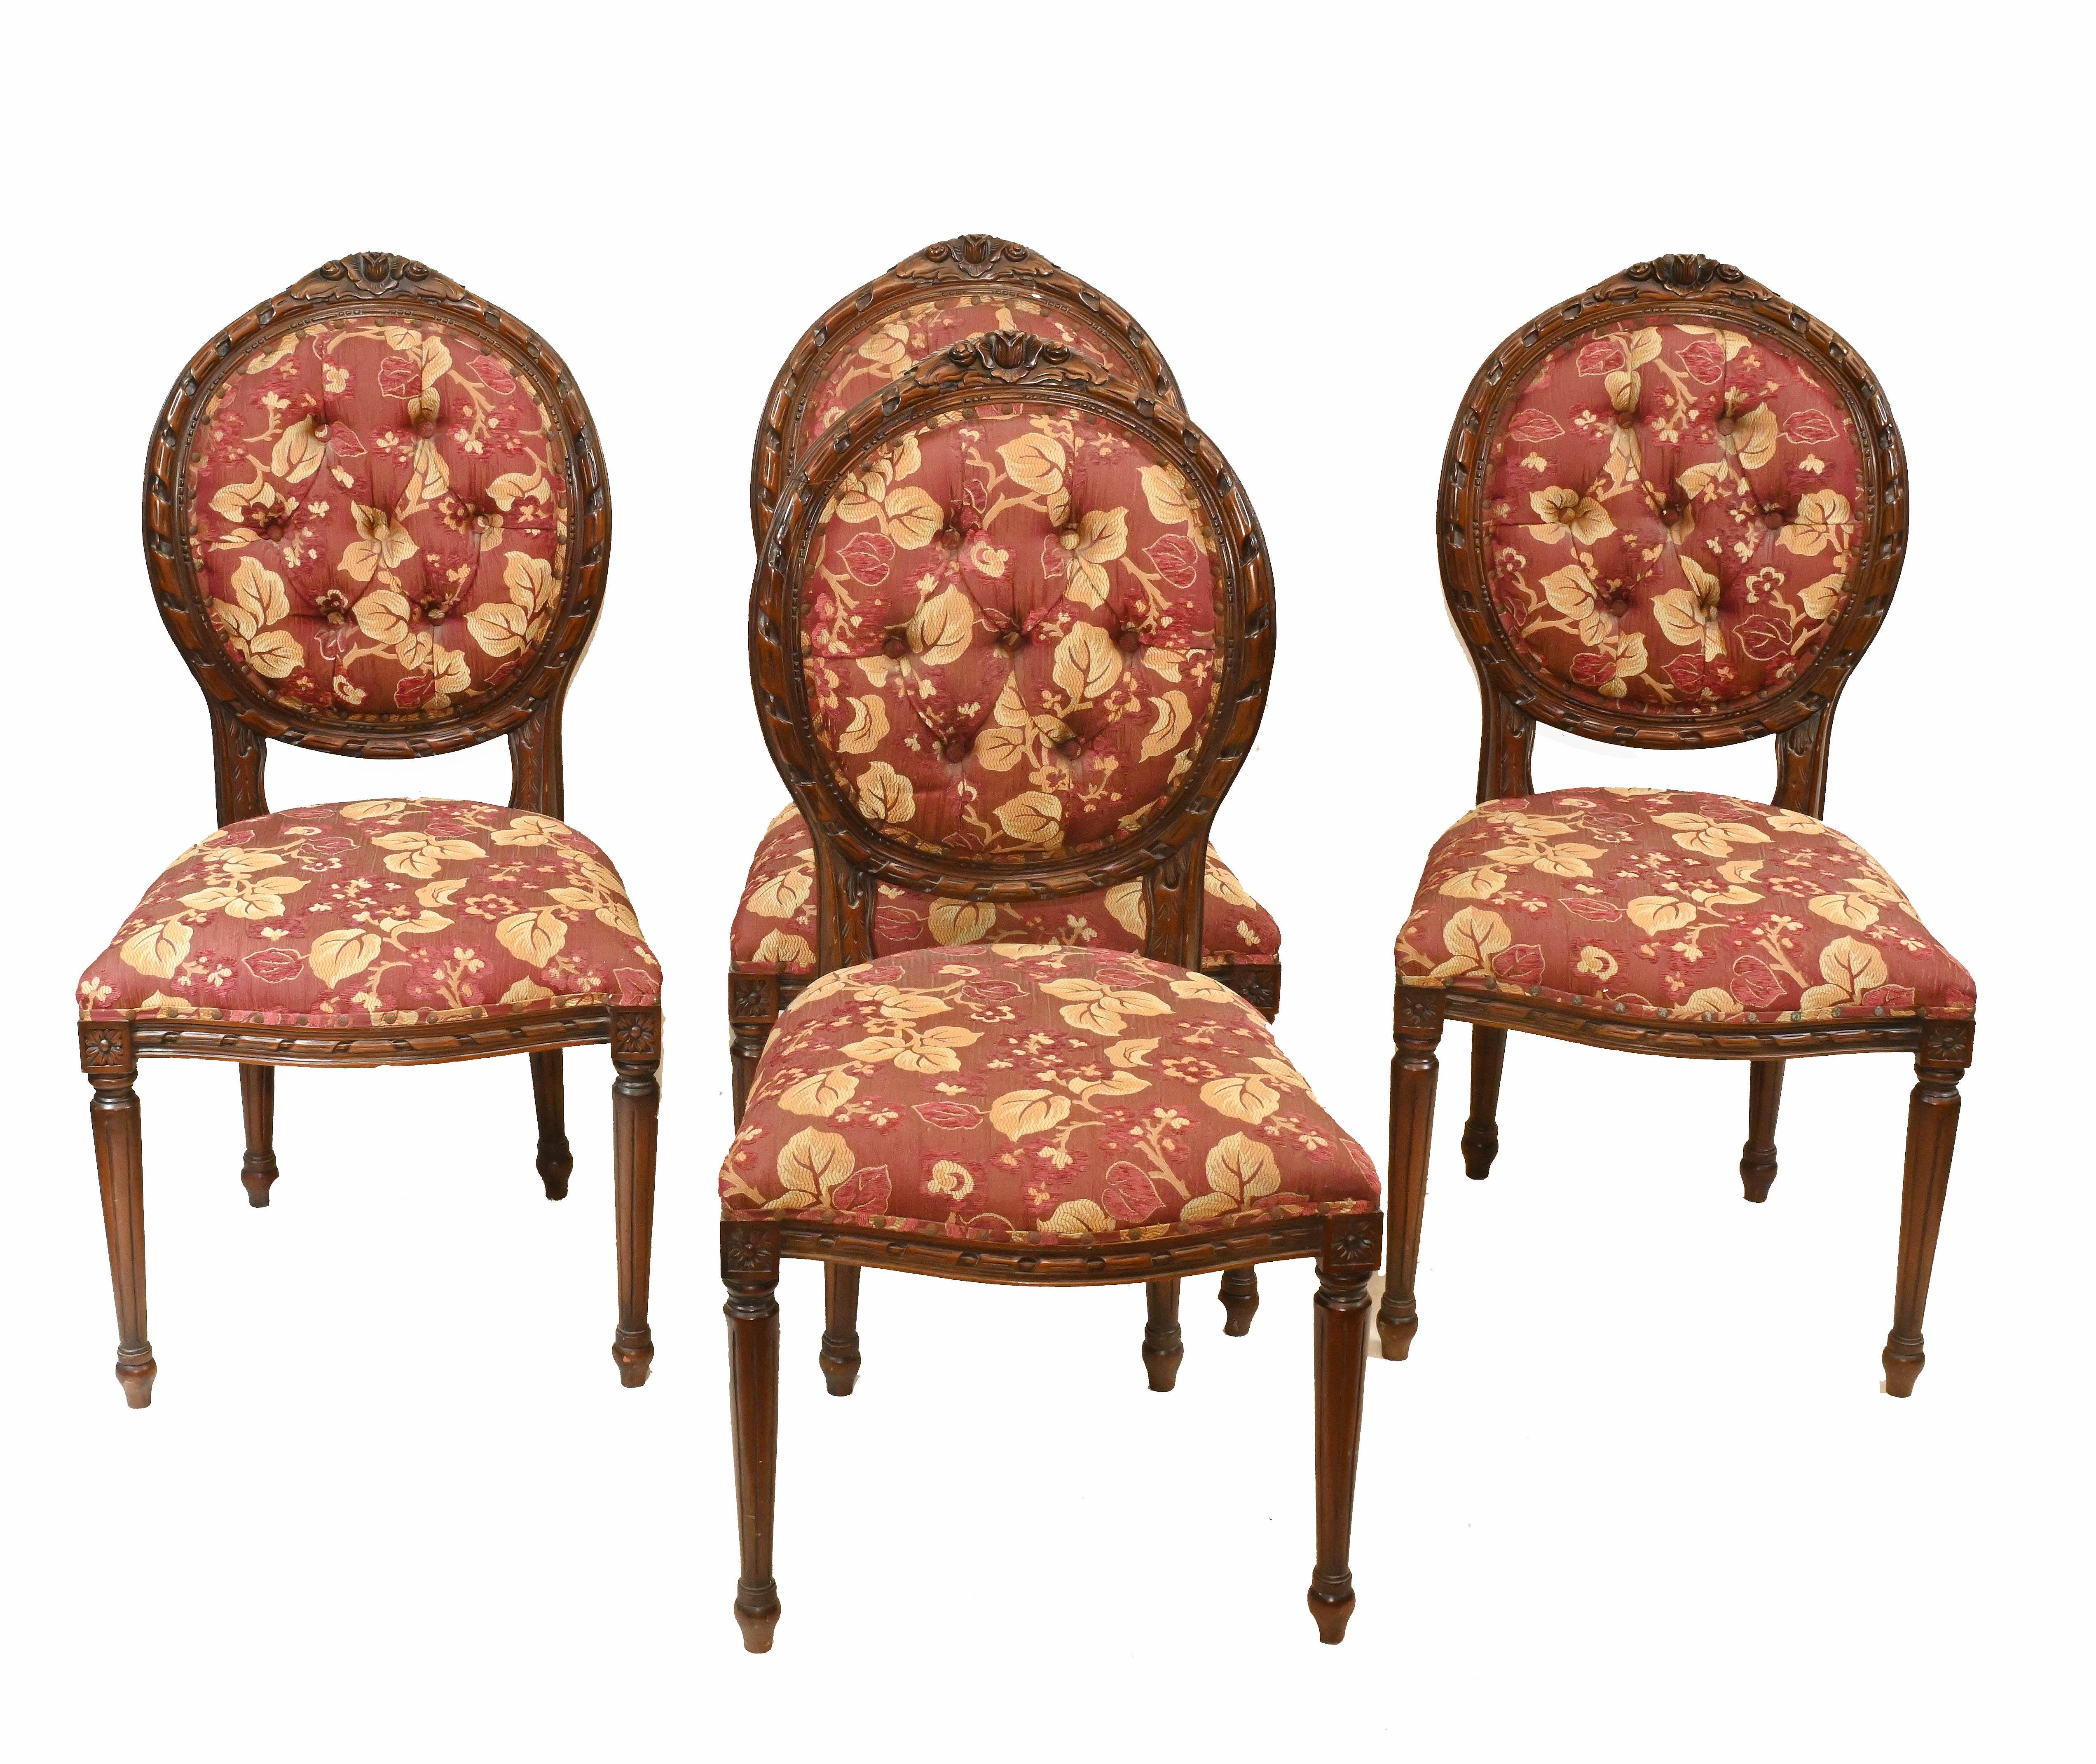 Cool set of four Victorian dining chairs in mahogany
Nice floral designs on the eye catching fabric
Comfortable to sit at and we date this set to circa 1880
Offered in great shape ready for home use right away
We ship to every corner of the